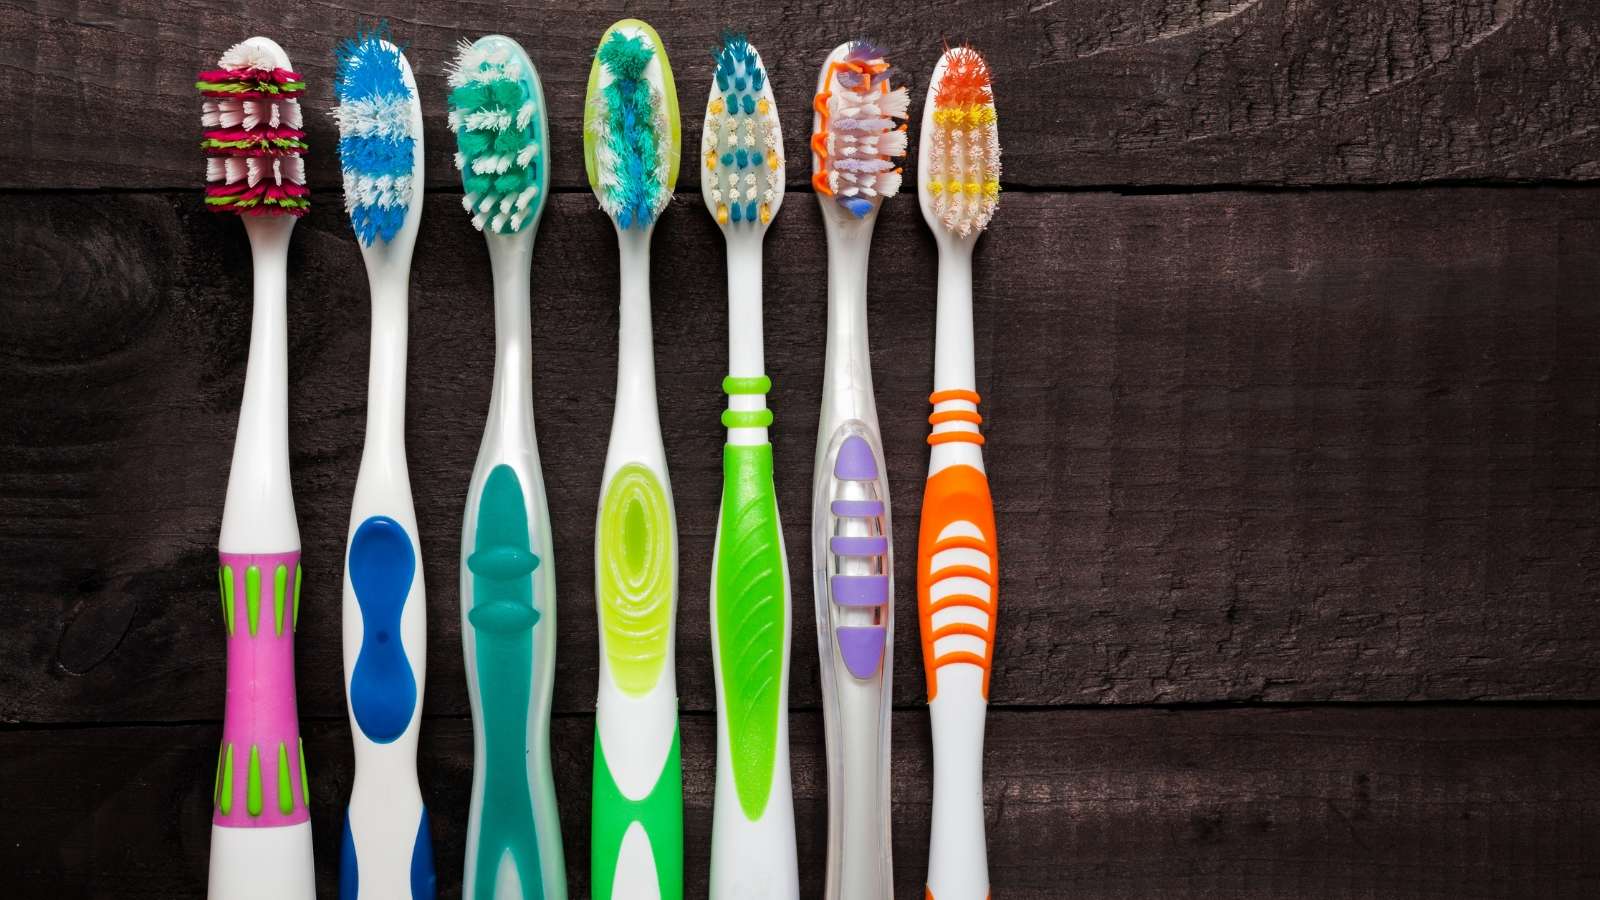 Article on best manual toothbrushes - colorful toothbrushes on black wooden background